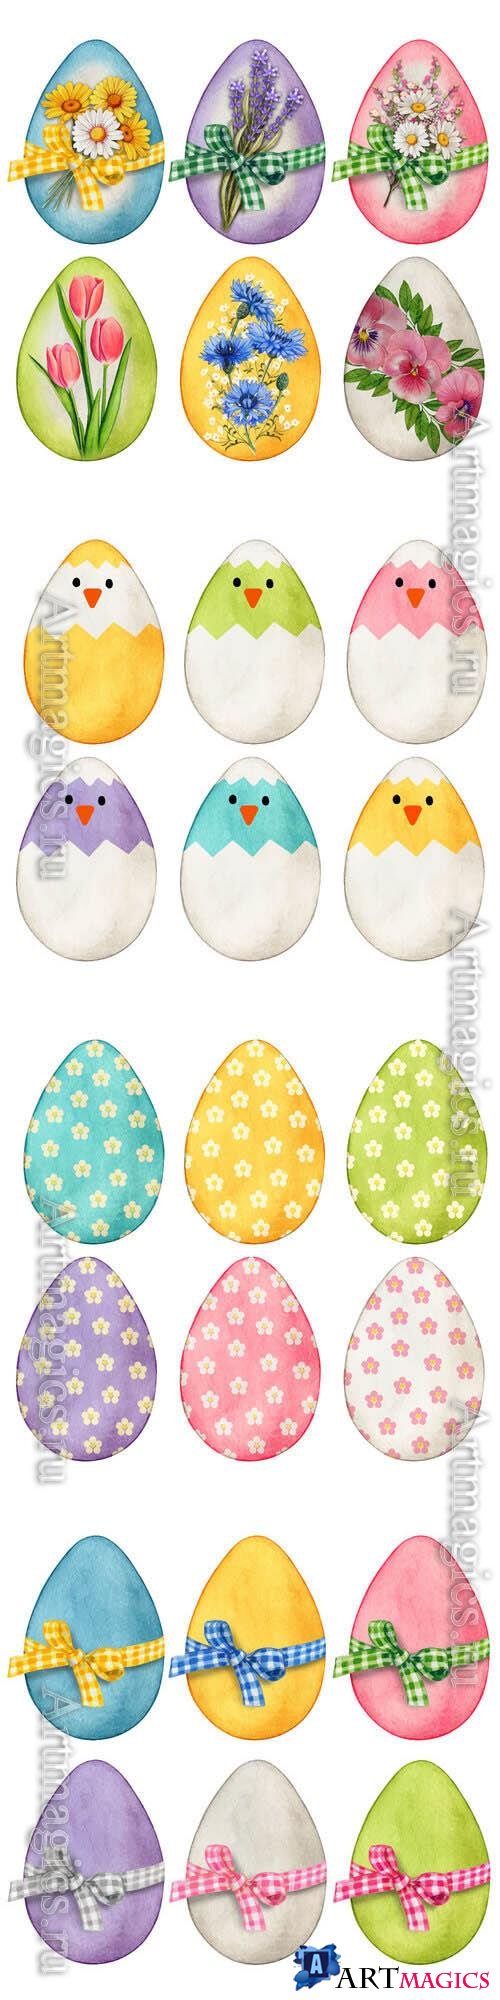 Pastel easter eggs decorations - Watercolor vector illustration